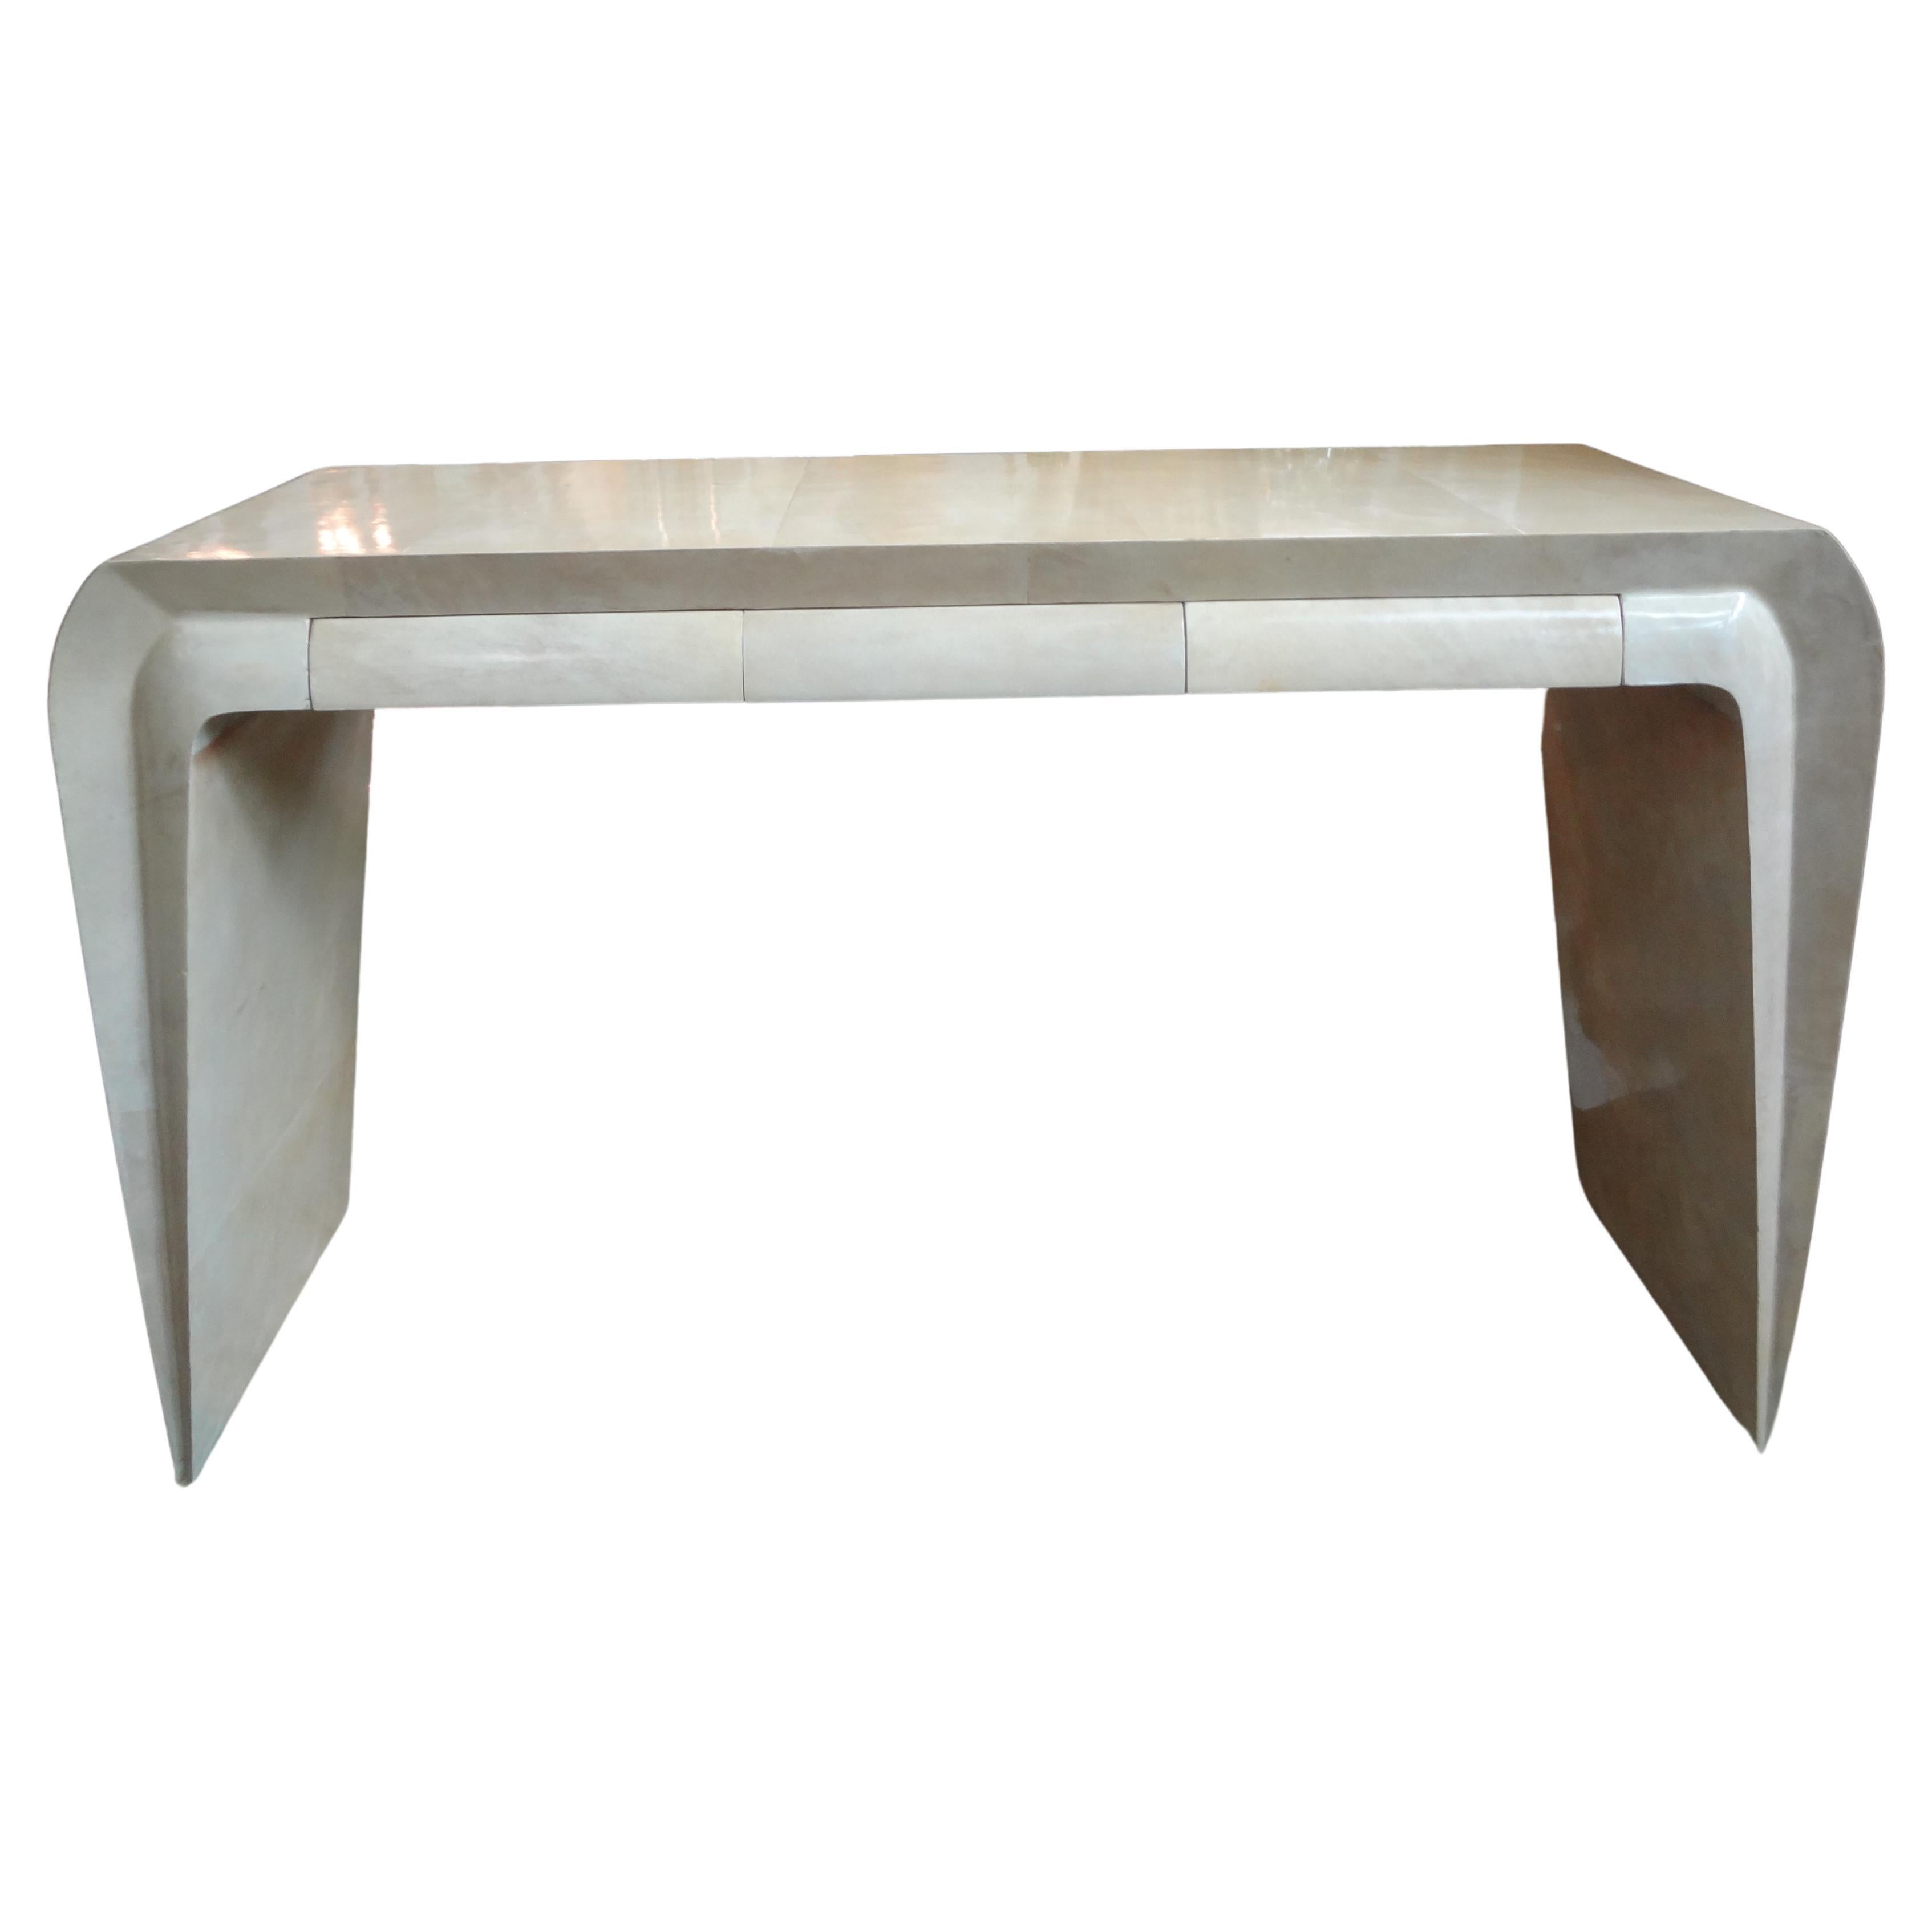 Italian Modern Parchment Console Table